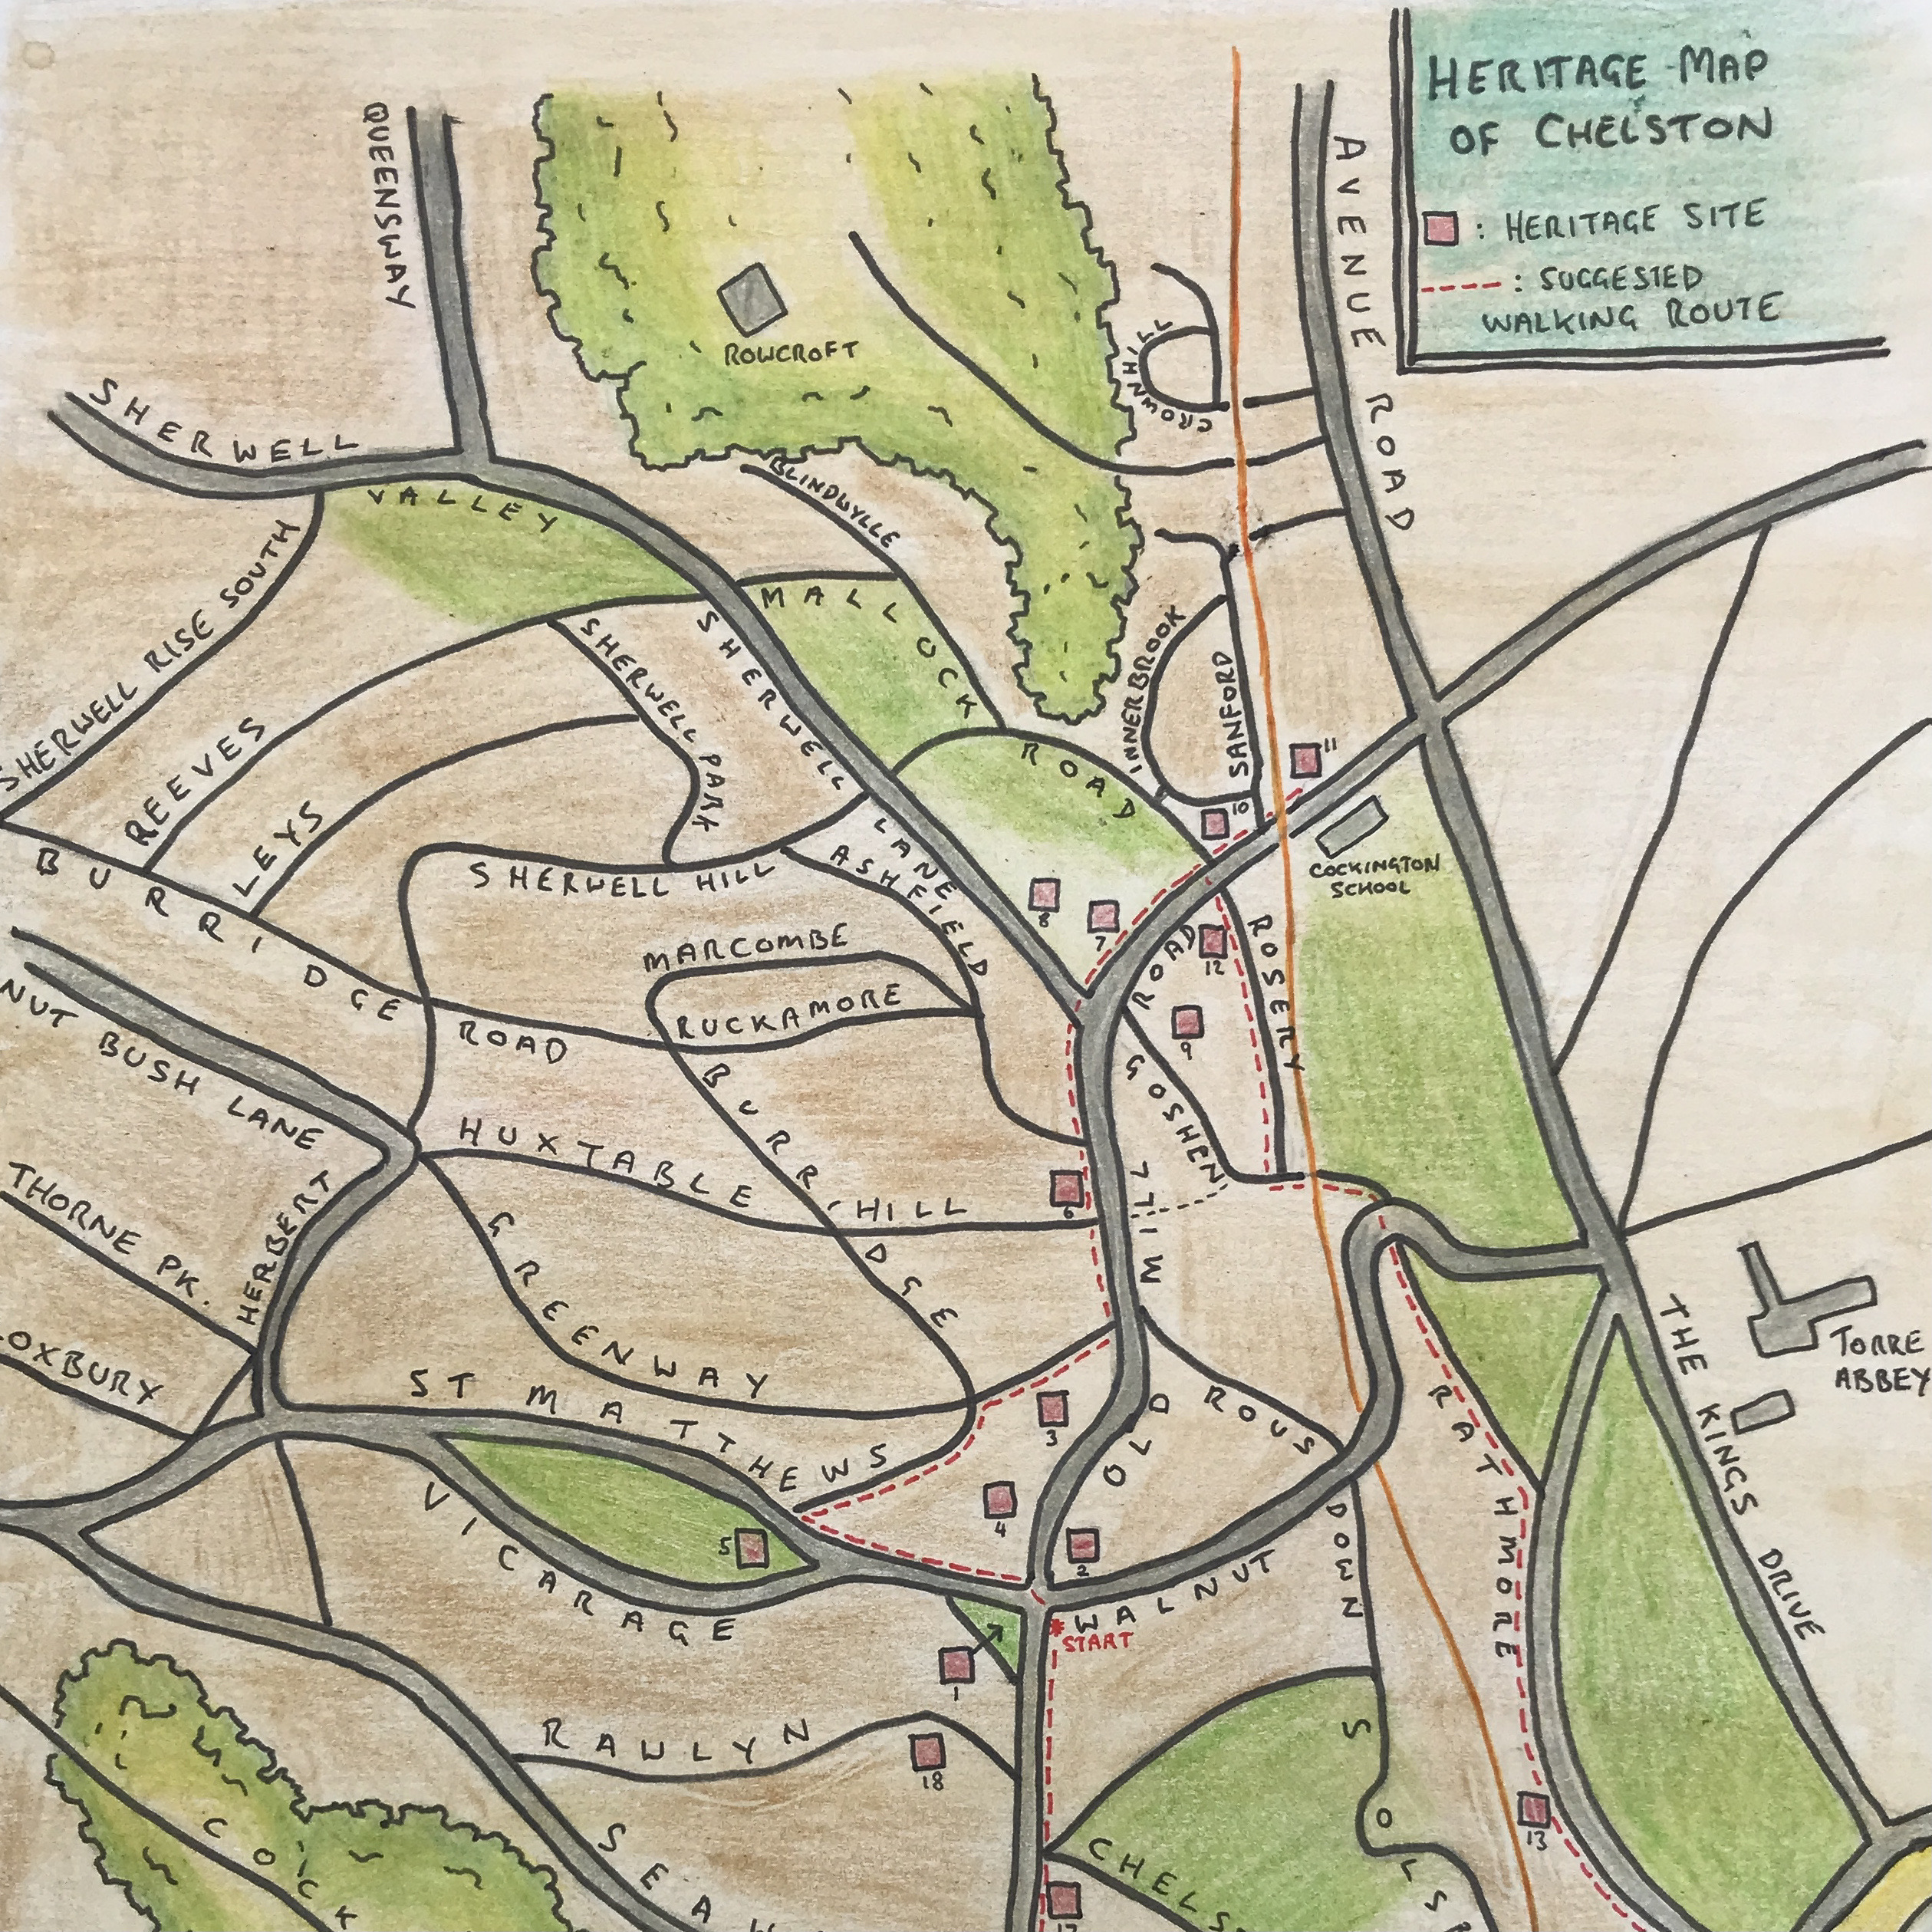 Image shows part of the Chelston Heritage Map